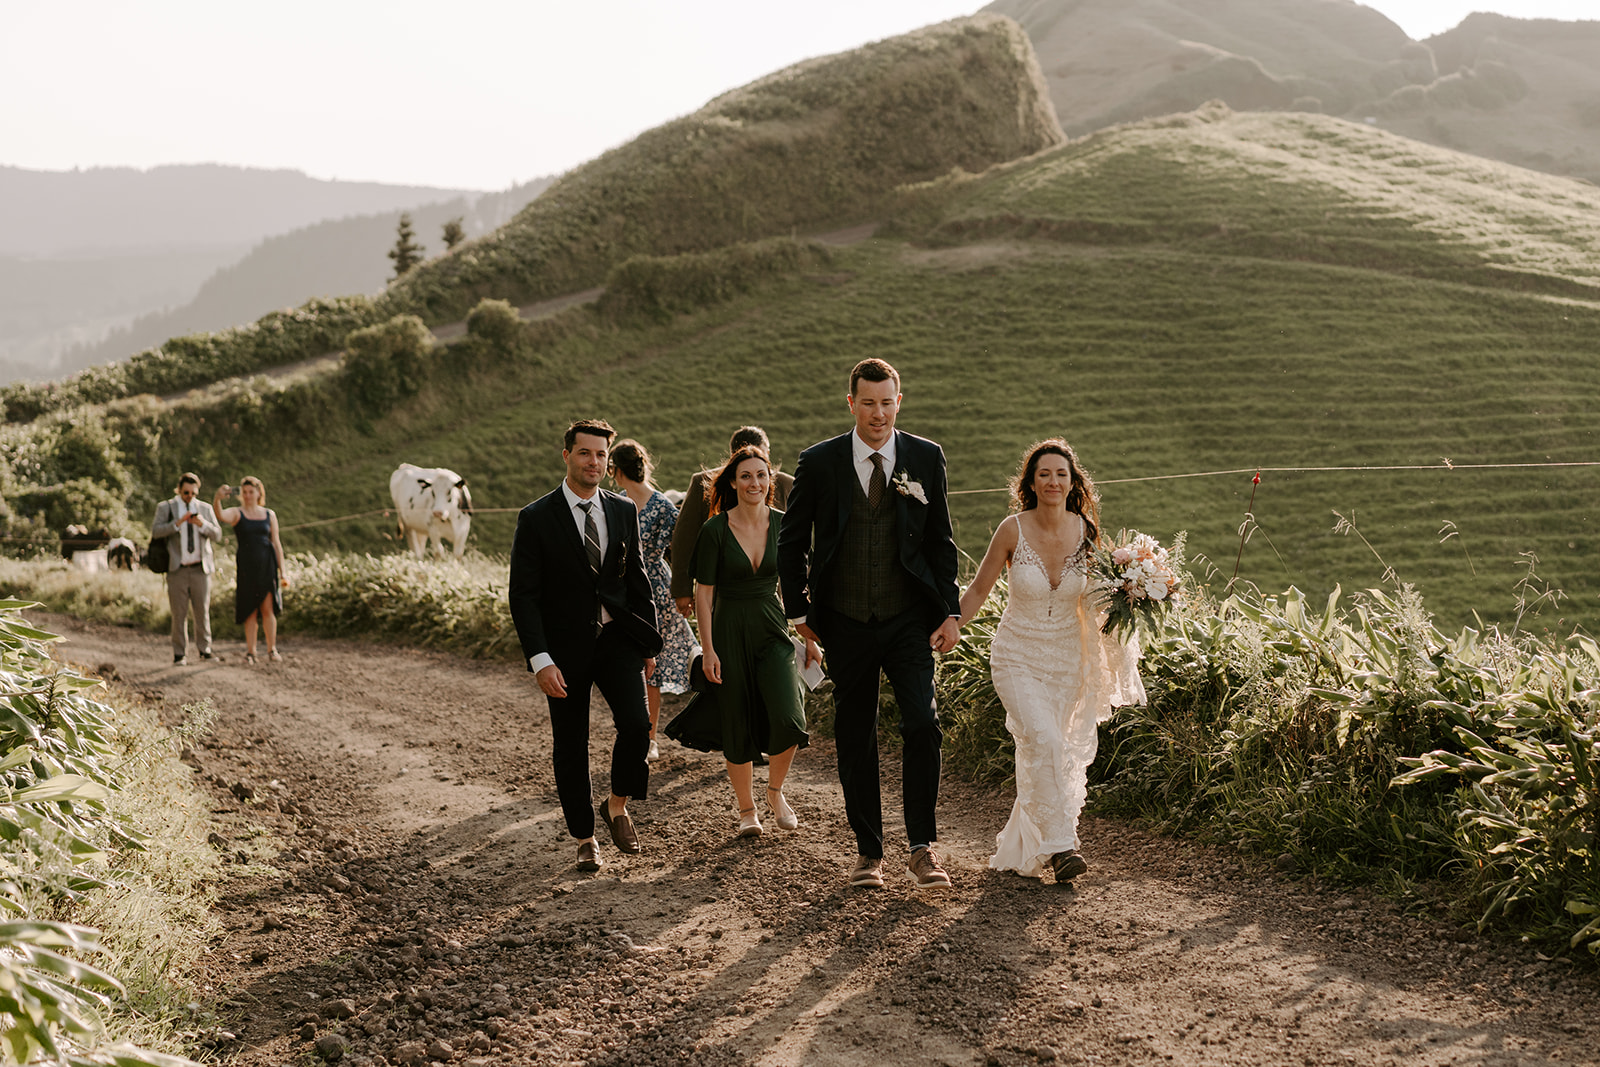 Elopement ceremony in the Azores